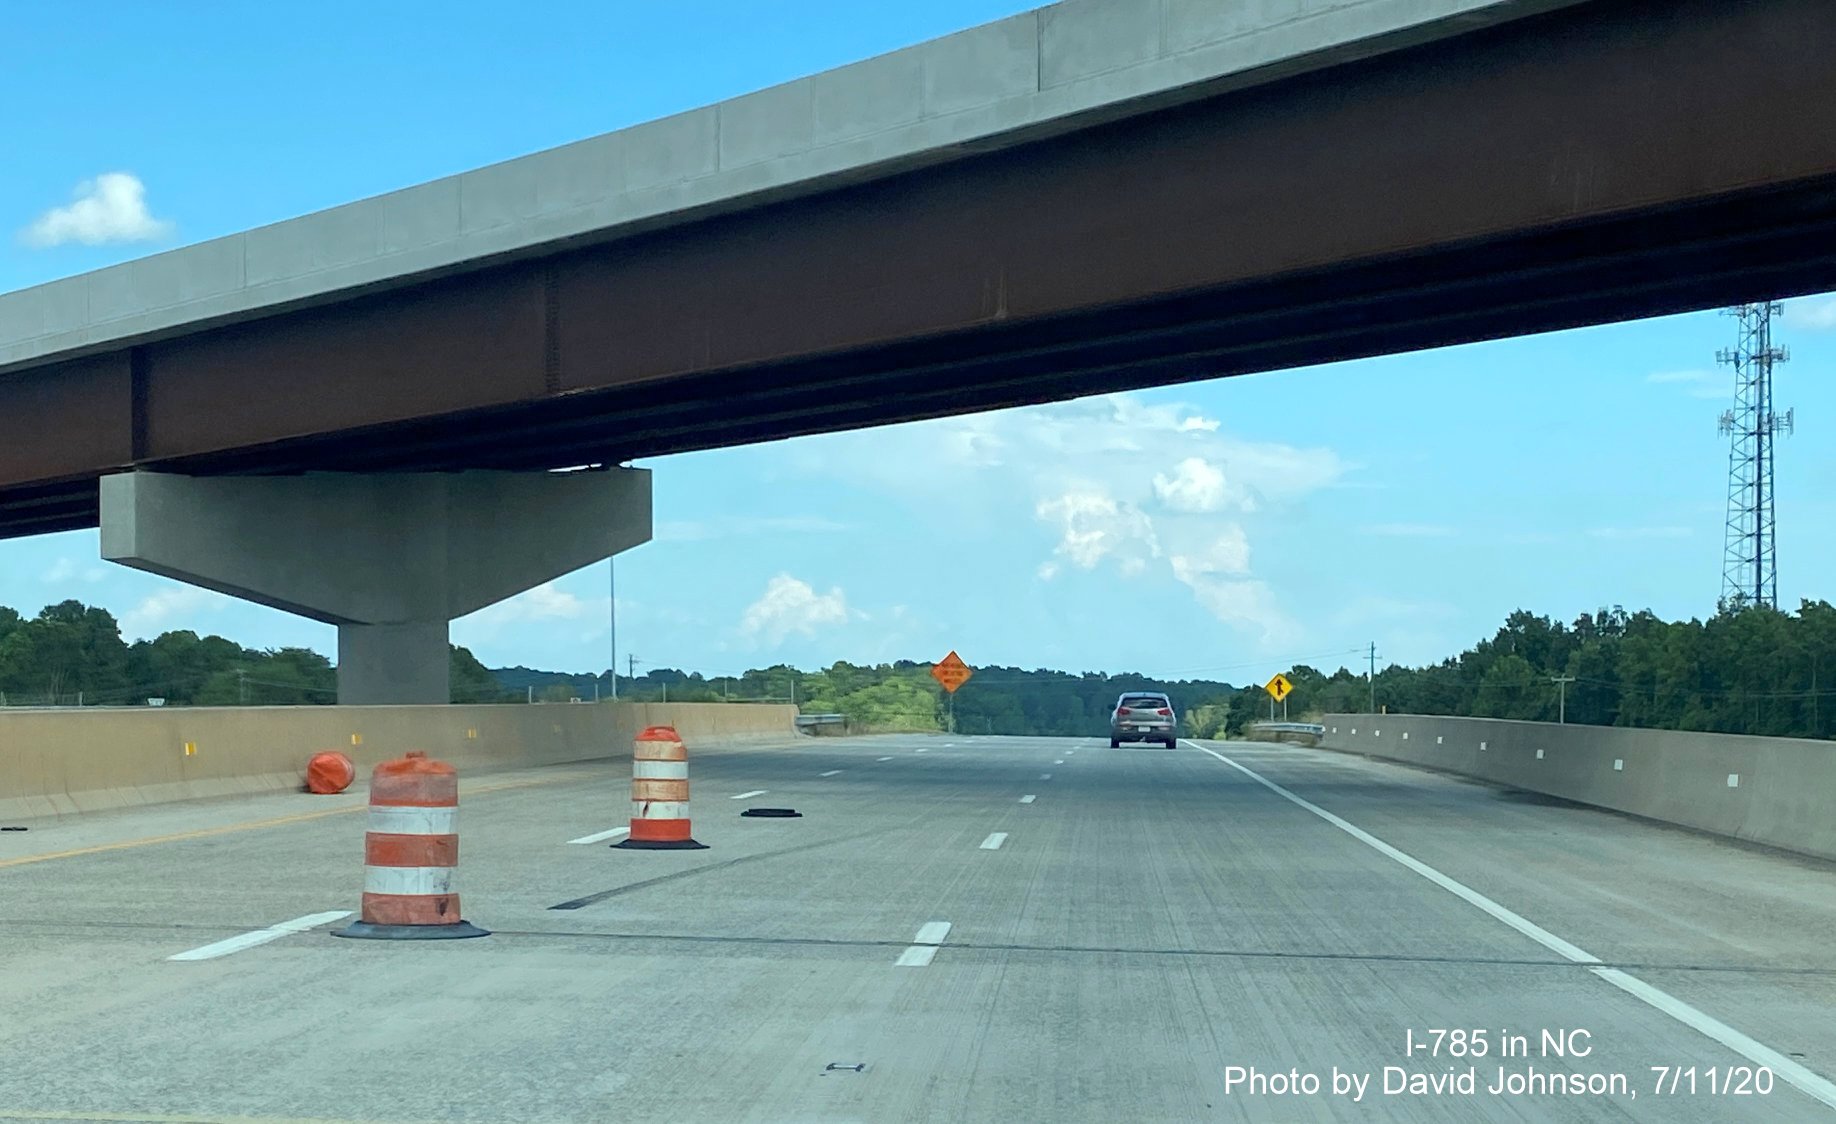 Image of completed future I-840 East to I-785 North flyover ramp from current start of I-785 South Greensboro Loop at US 29, by David Johnson July 2020